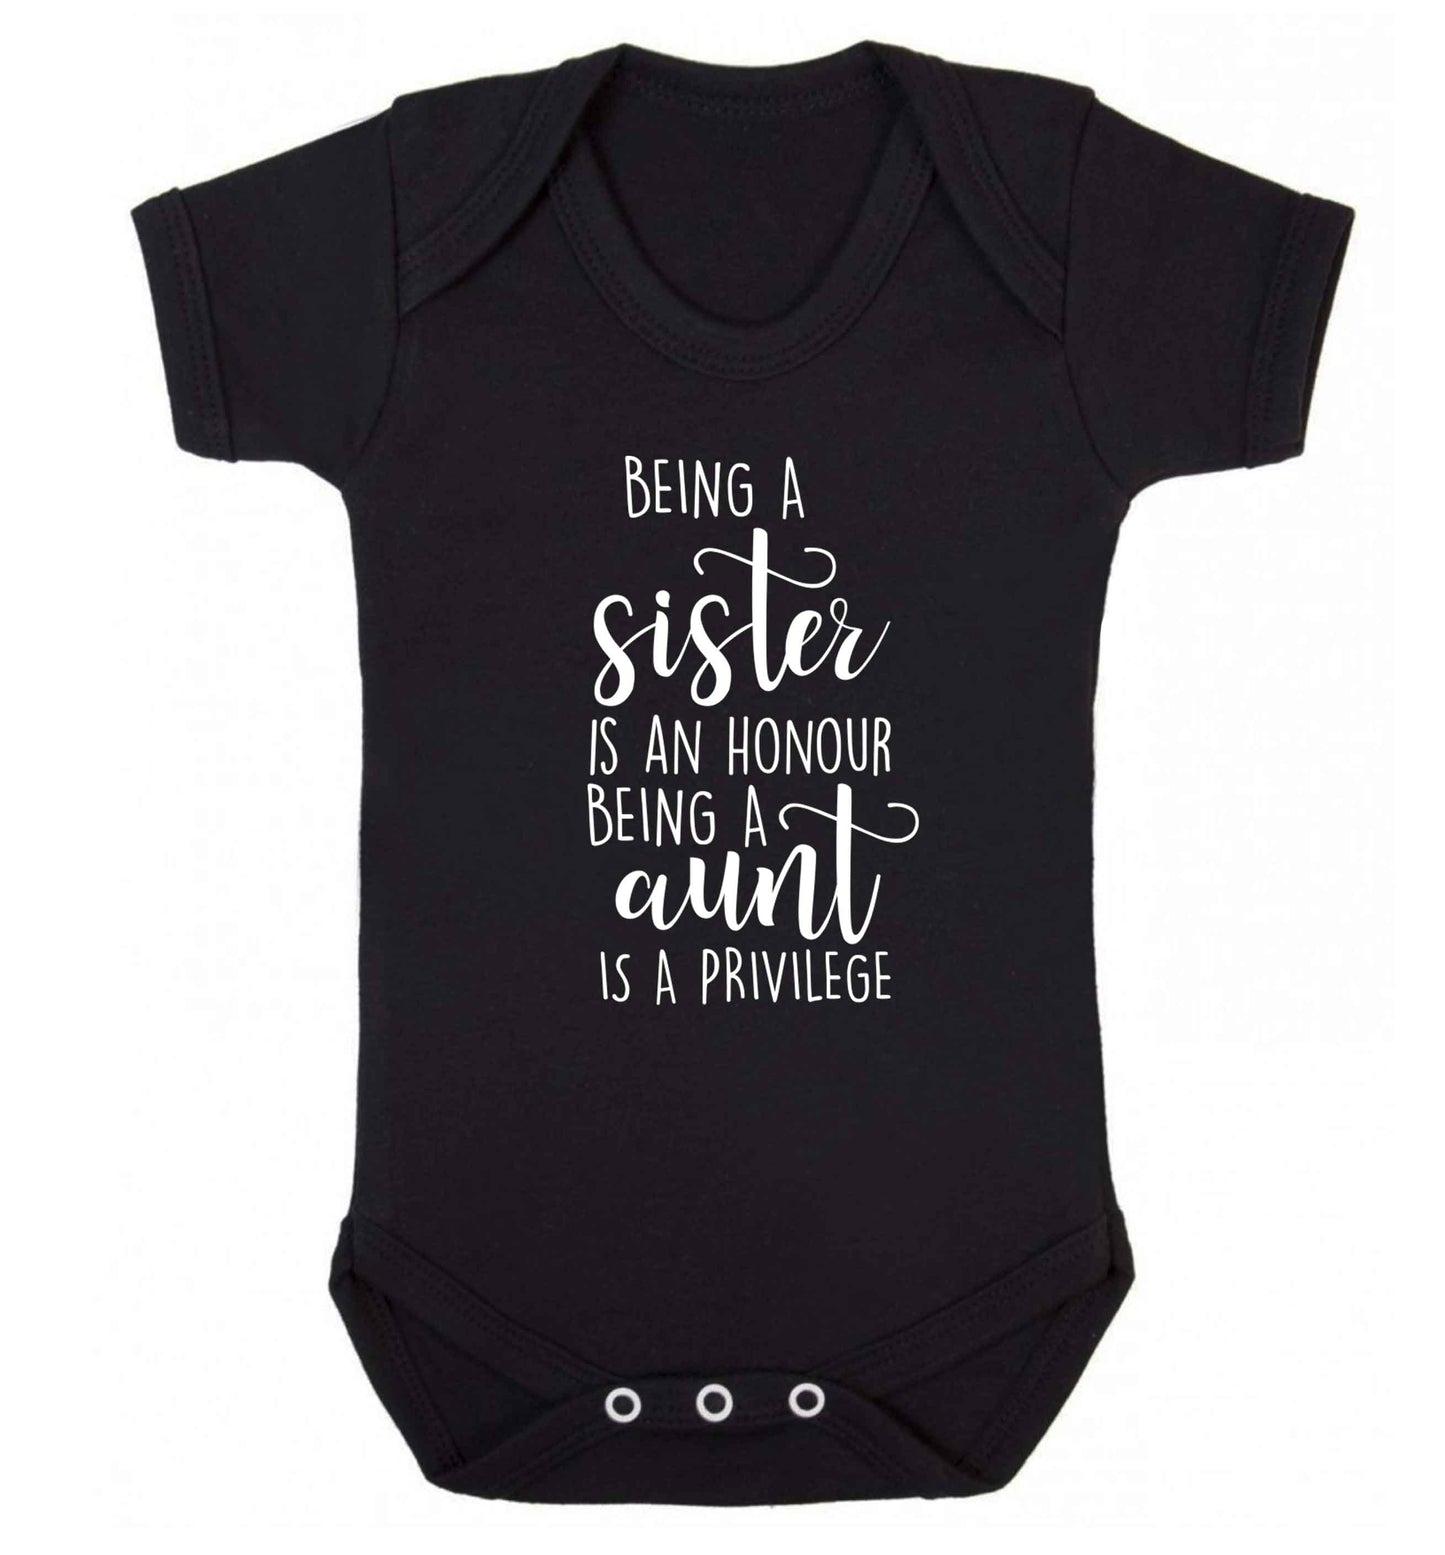 Being a sister is an honour being an auntie is a privilege Baby Vest black 18-24 months